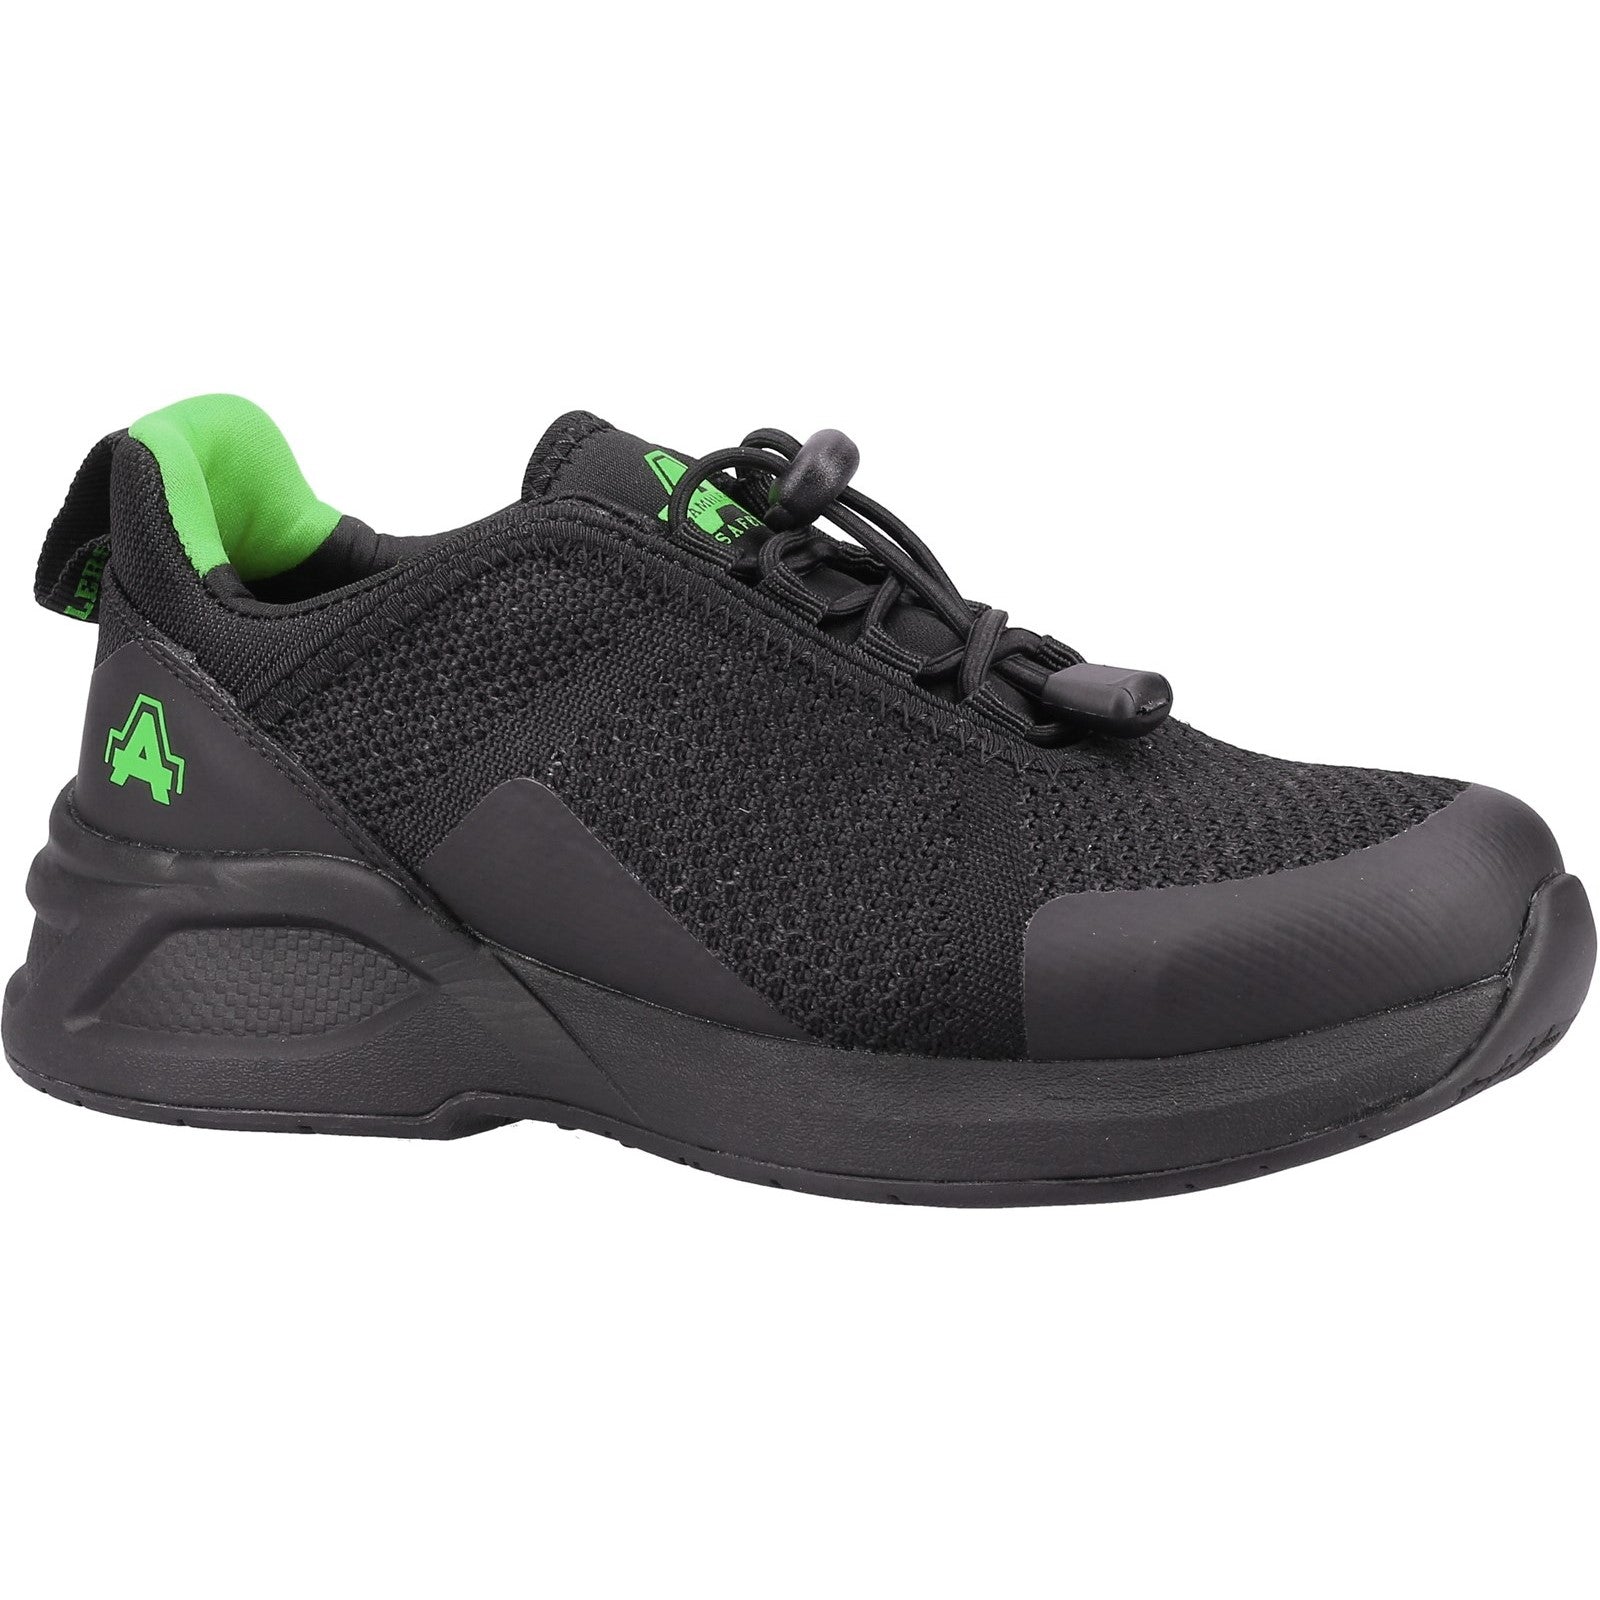 Amblers 610 Safety Trainers - Black